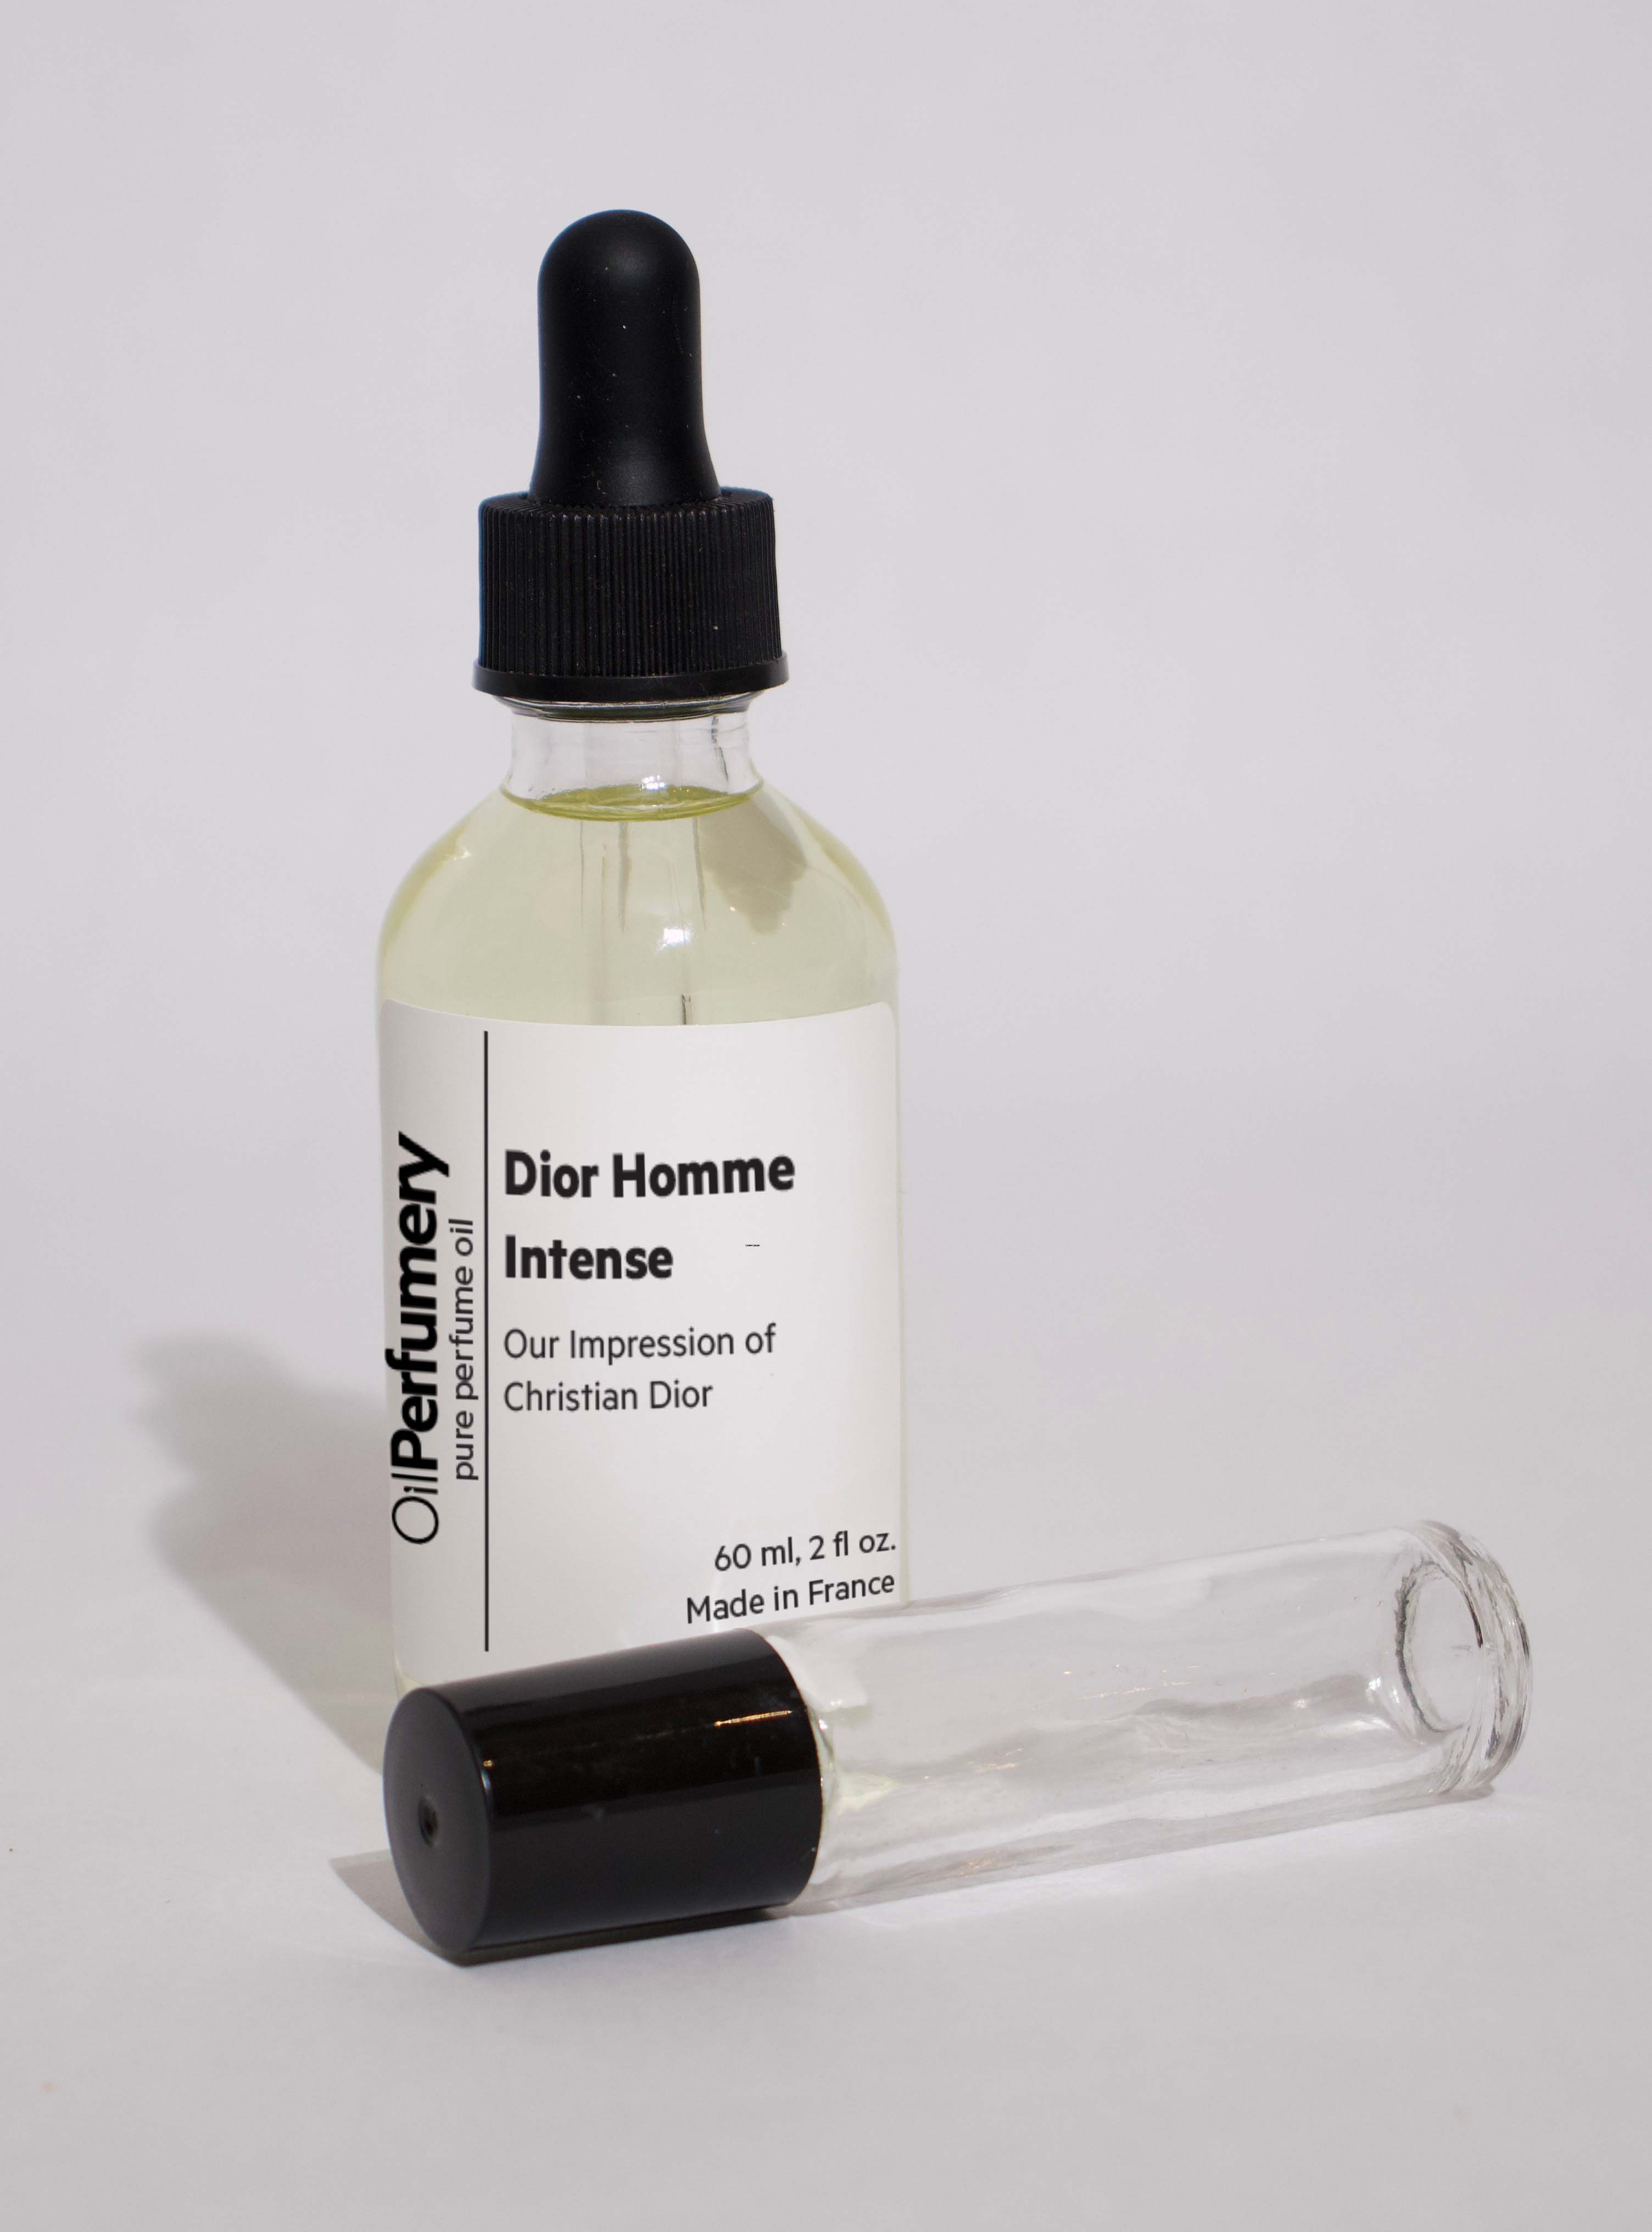 Dior Homme Intense Formulations Between The Past and The Present